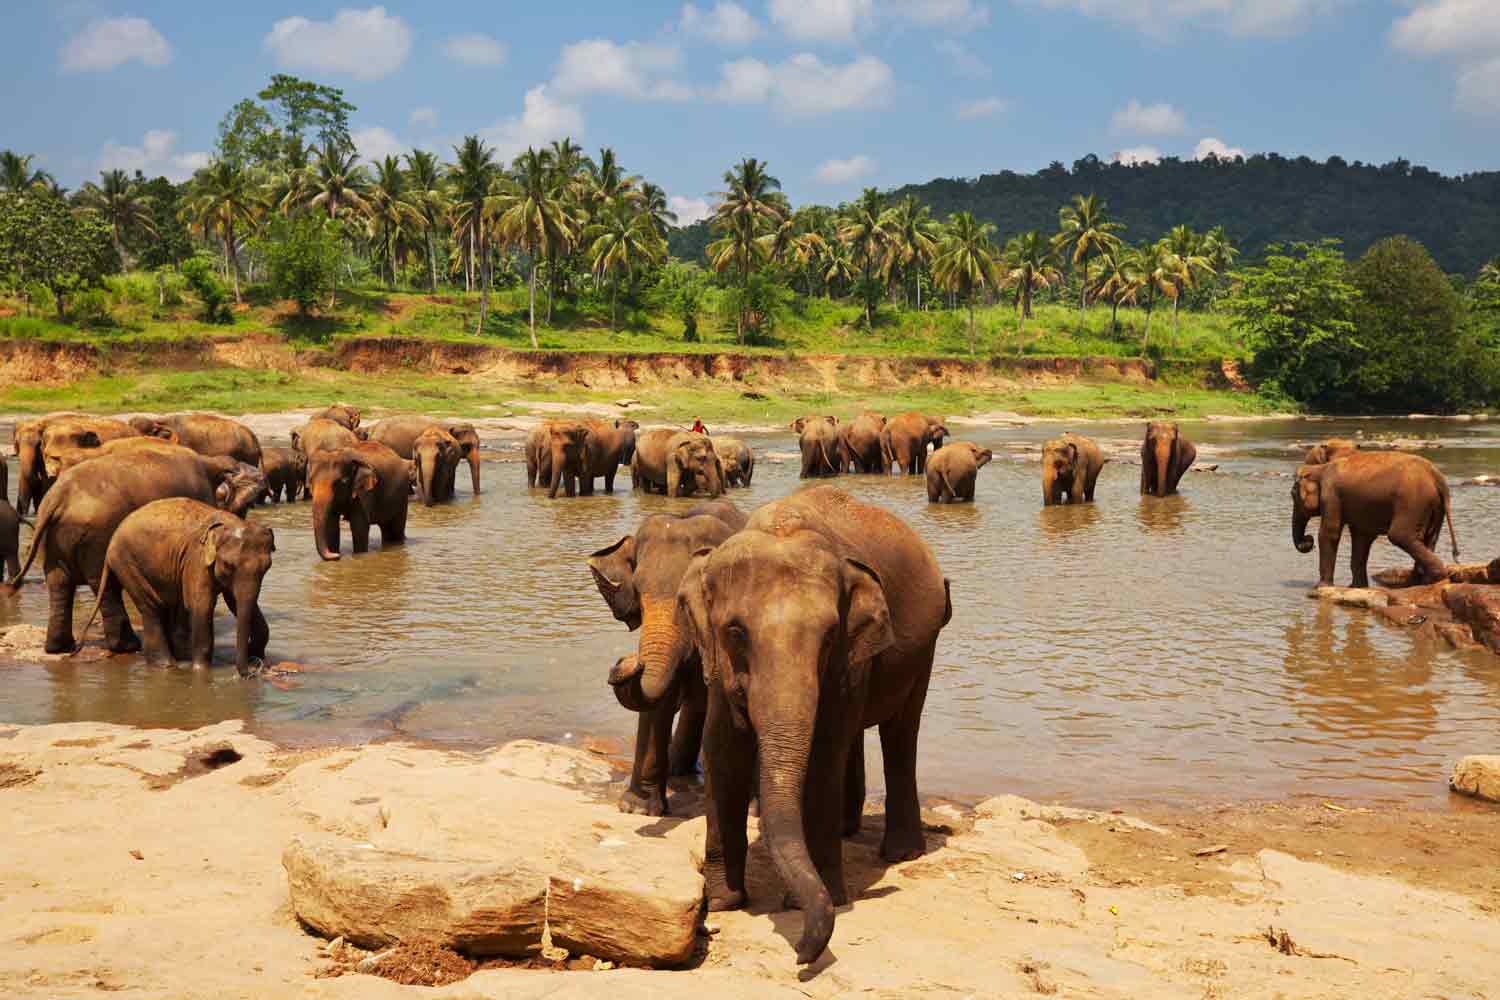 elephants in the water at a national park in sri lanka